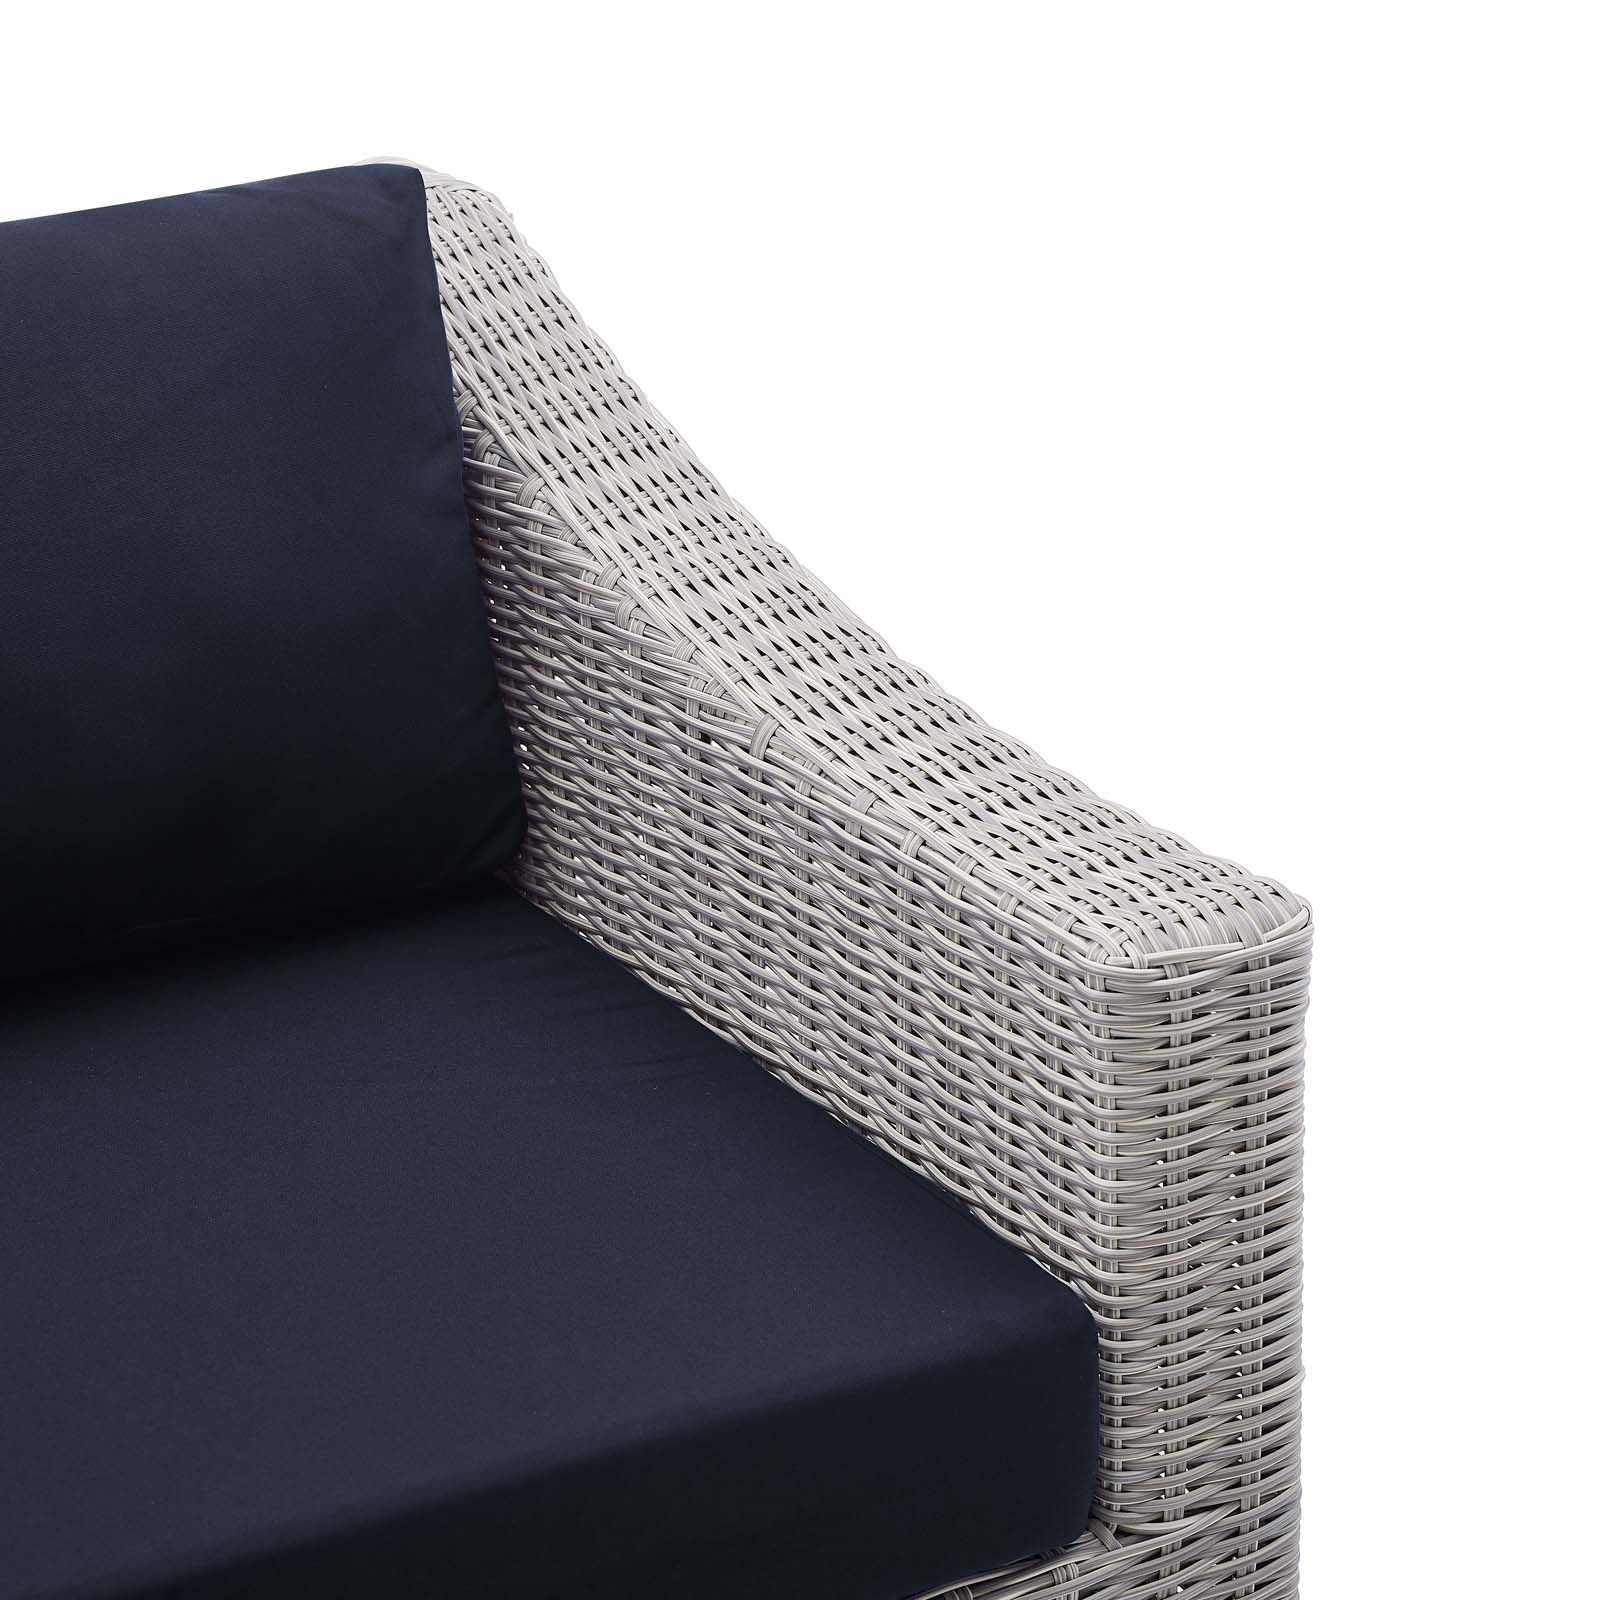 Conway Outdoor Patio Wicker Rattan Right Arm Chair Light Gray Navy Within Fabric Outdoor Wicker Armchairs (View 5 of 15)